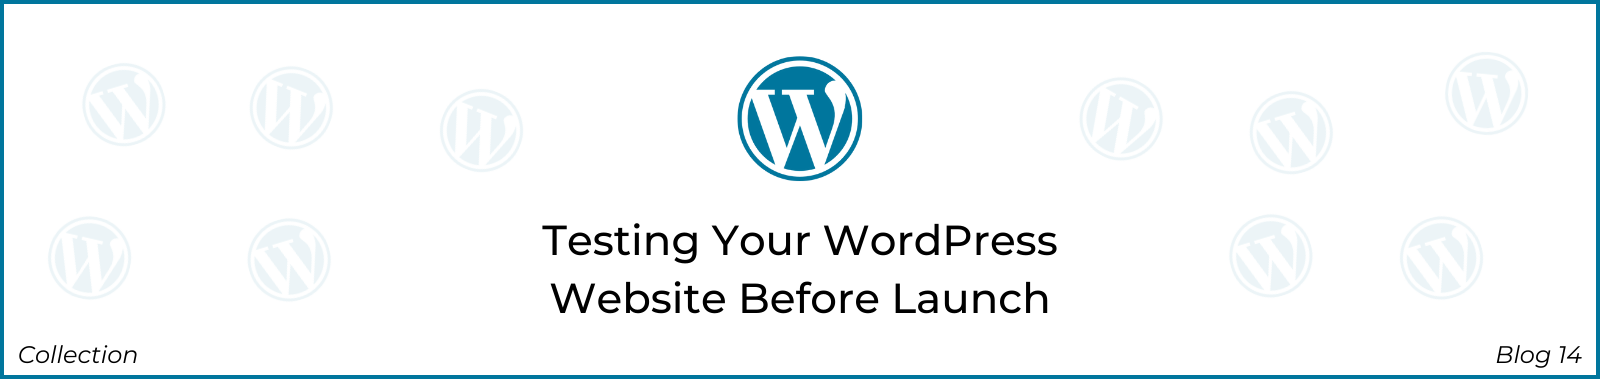 Testing Your WordPress Website Before Launch